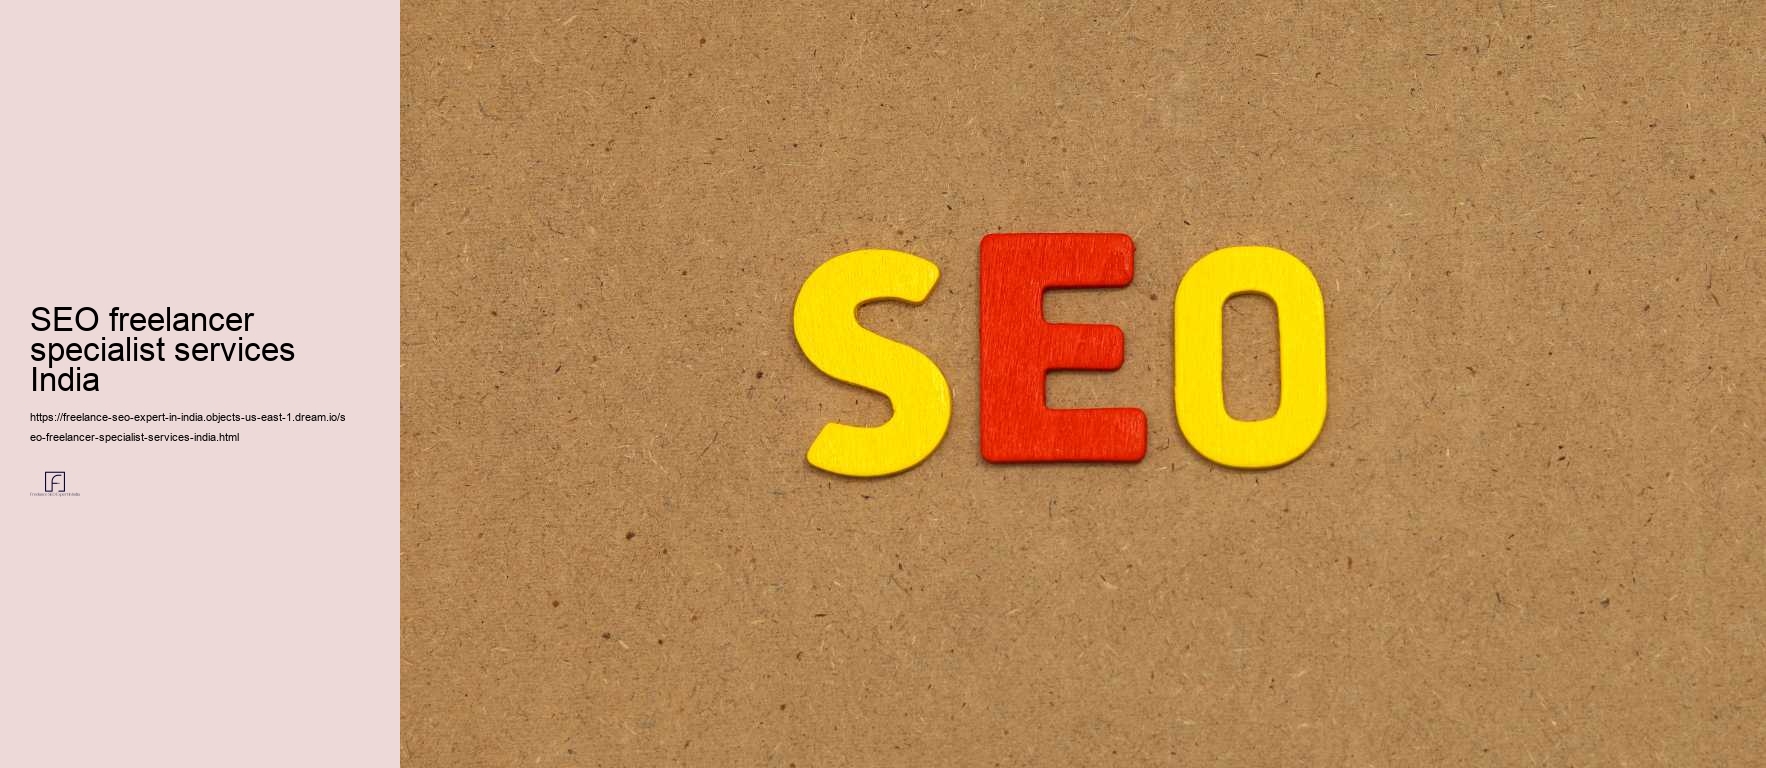 SEO freelancer specialist services India